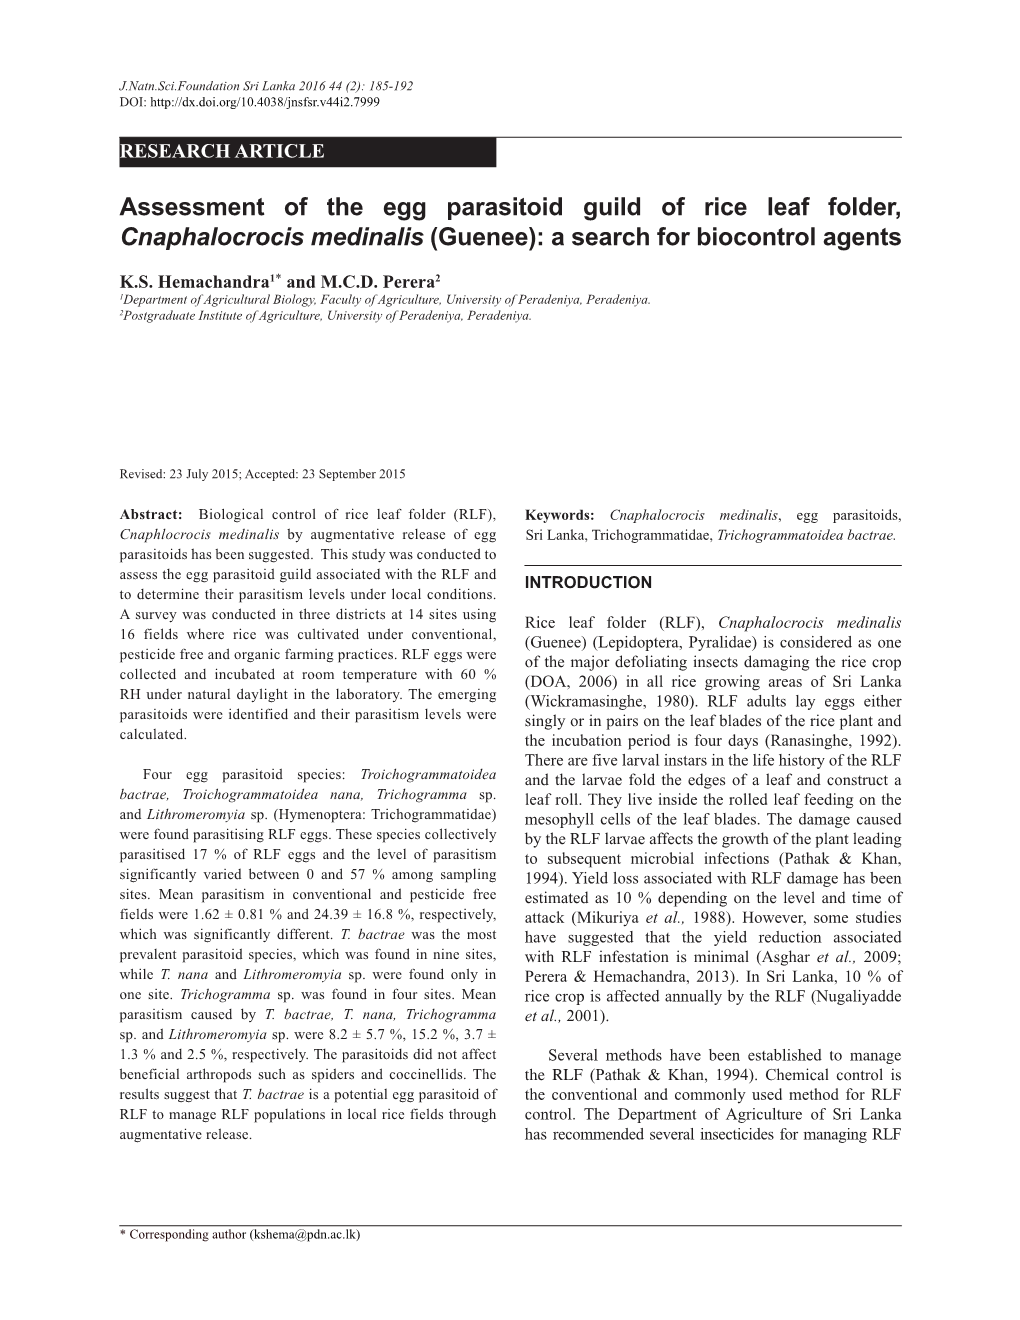 Assessment of the Egg Parasitoid Guild of Rice Leaf Folder, Cnaphalocrocis Medinalis (Guenee): a Search for Biocontrol Agents